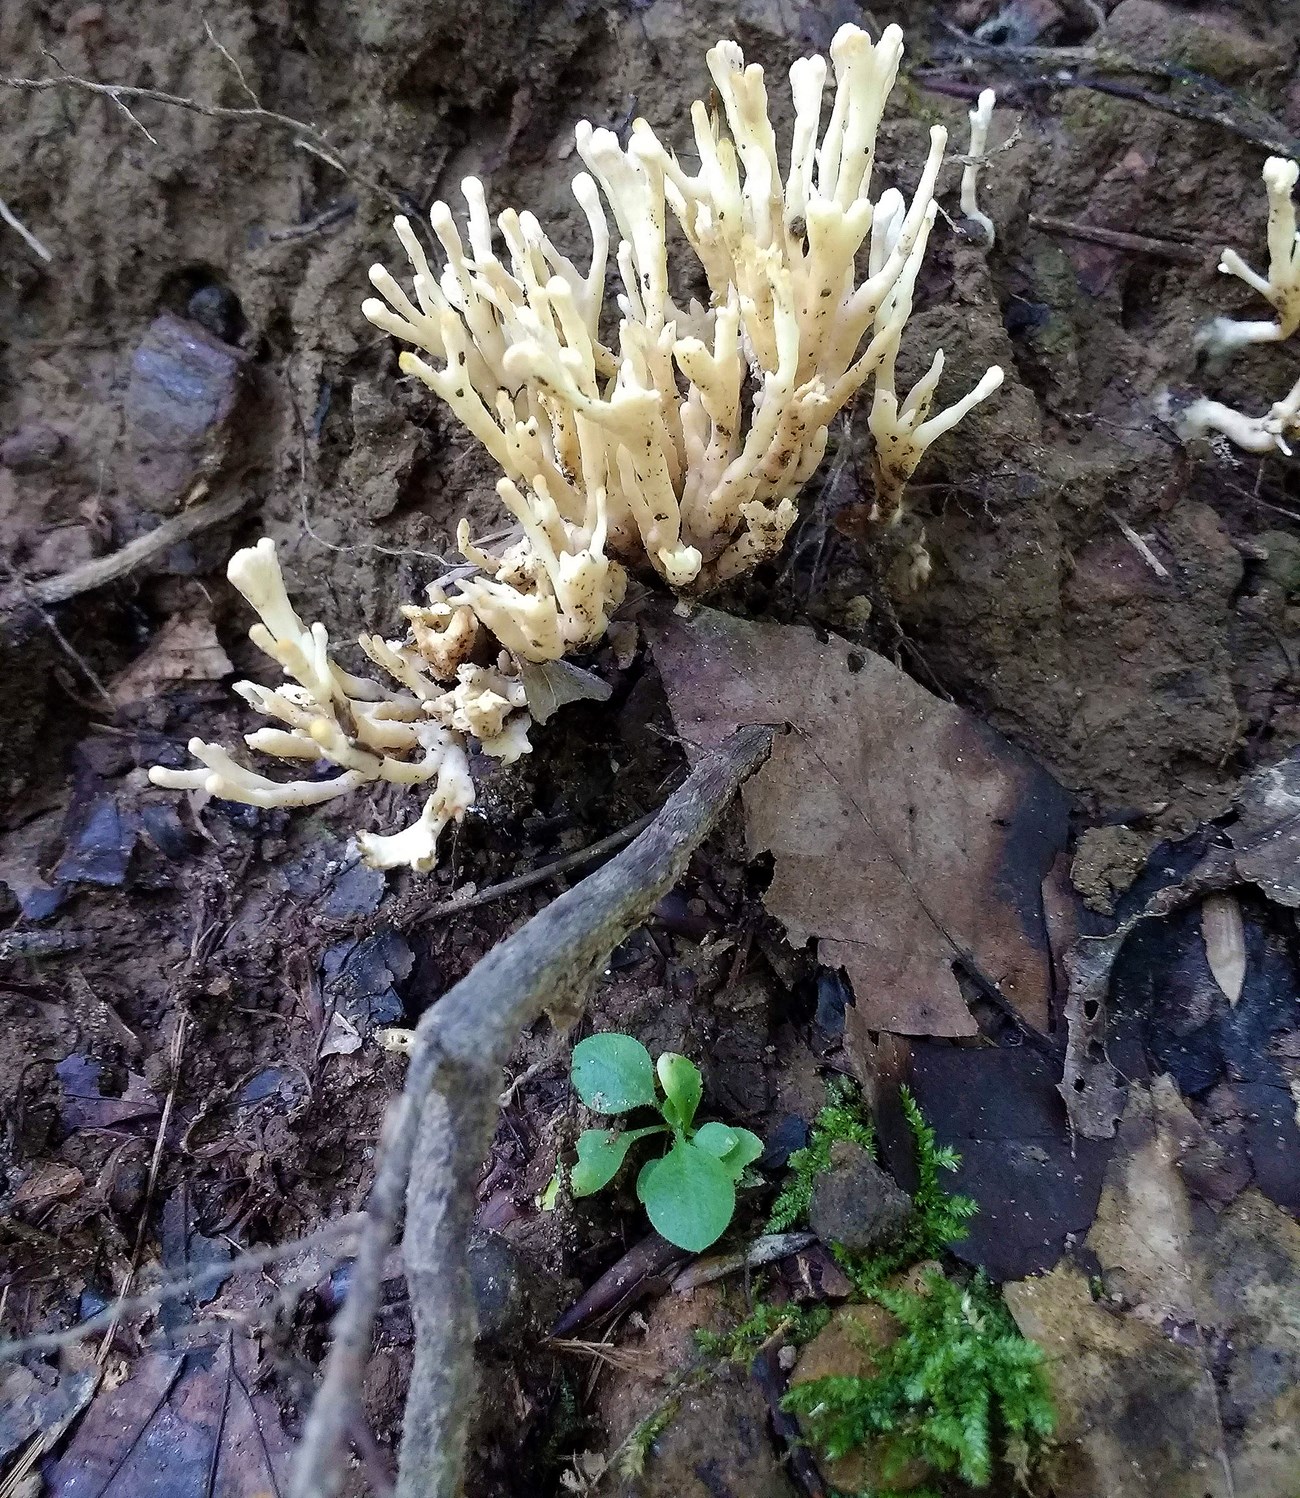 White fungi poke out of the dark brown forest soil next to green plants